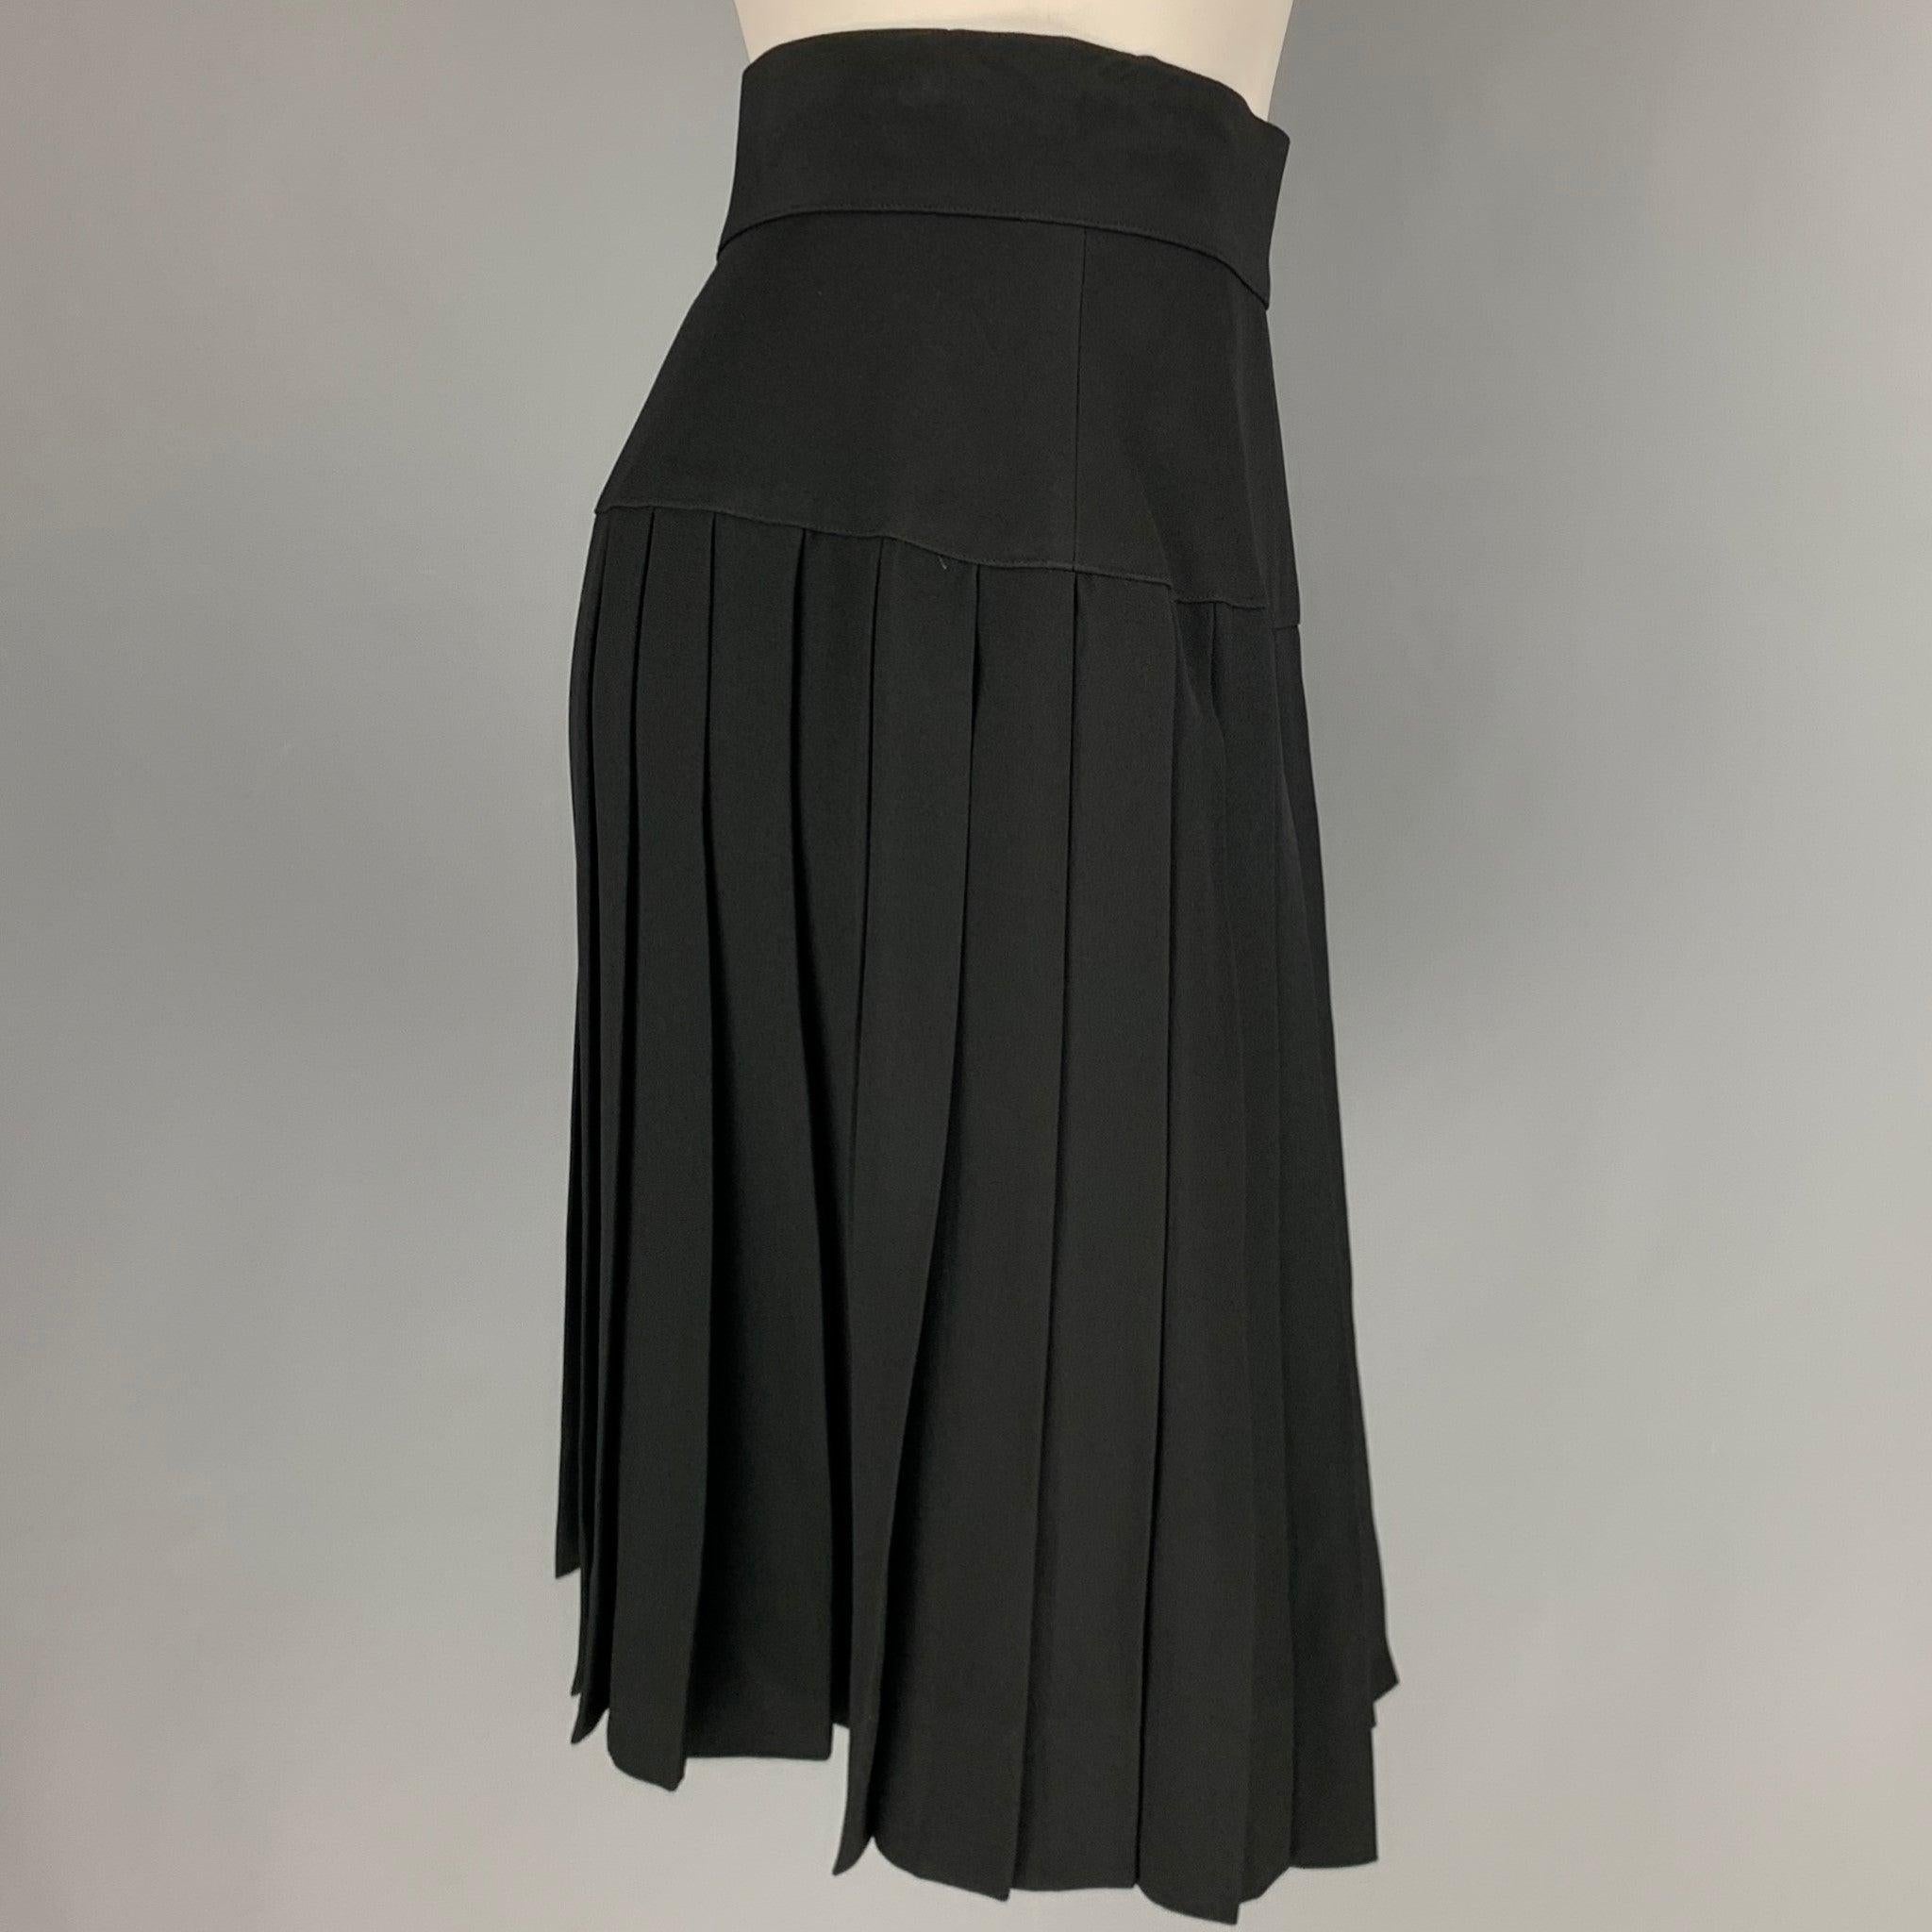 CHANEL Size 6 Black Acetate Rayon Pleated Below Knee Skirt In Excellent Condition For Sale In San Francisco, CA